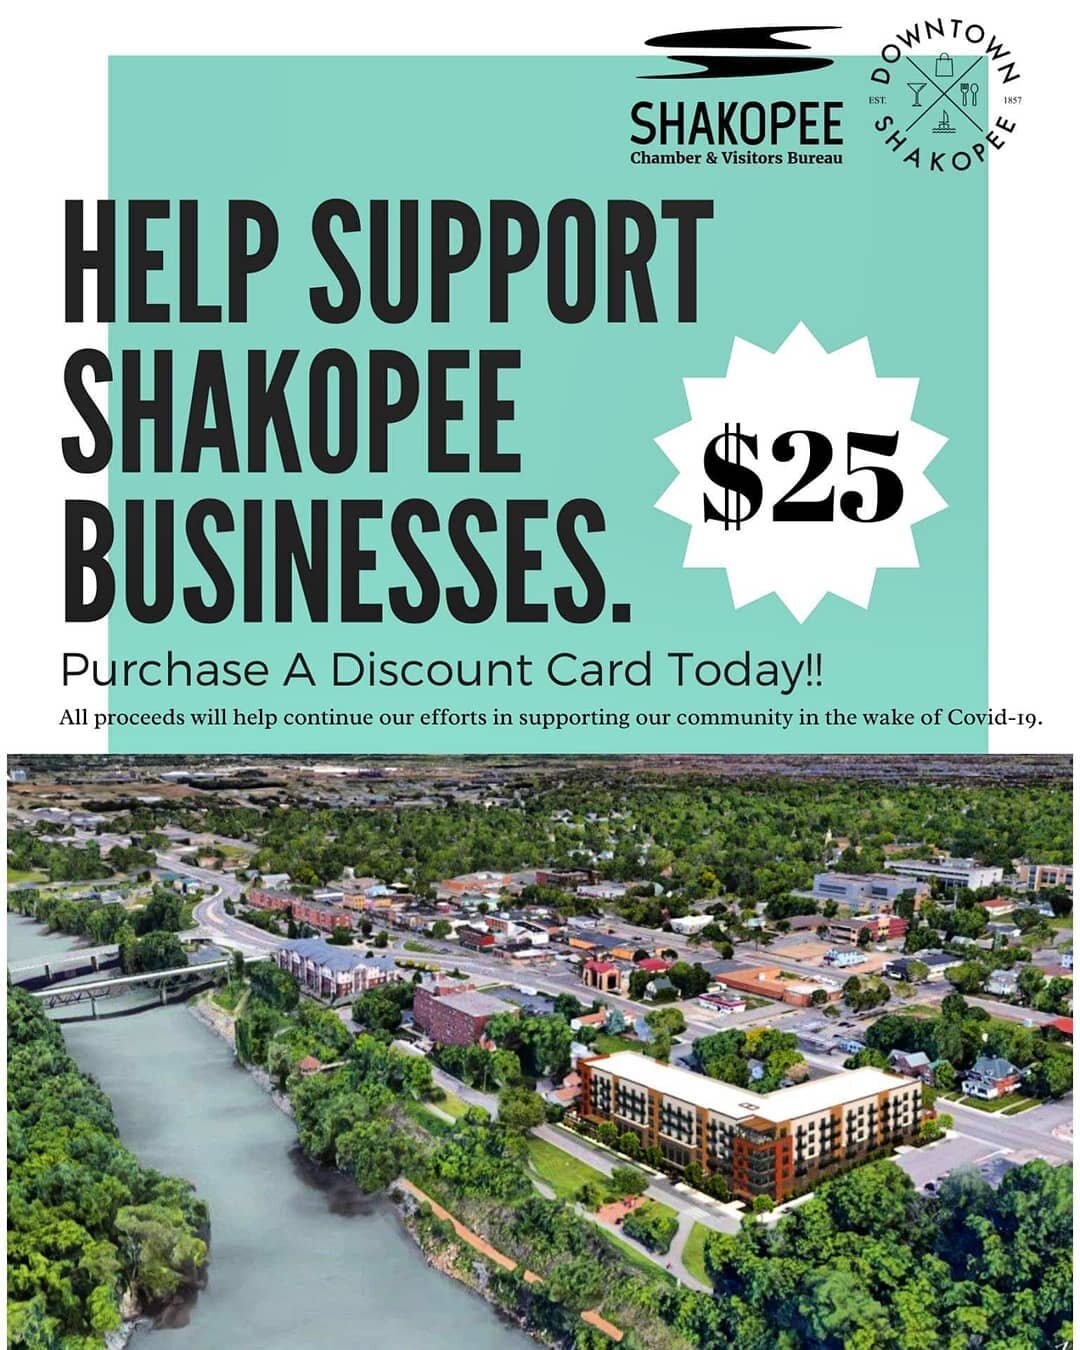 Have you purchased a Shakopee Patronage Discount Card yet?!❇️

This card is loaded with great deals and savings to local restaurants, stores, &amp; establishments- all while supporting our business community as they continue to deal with the impact o